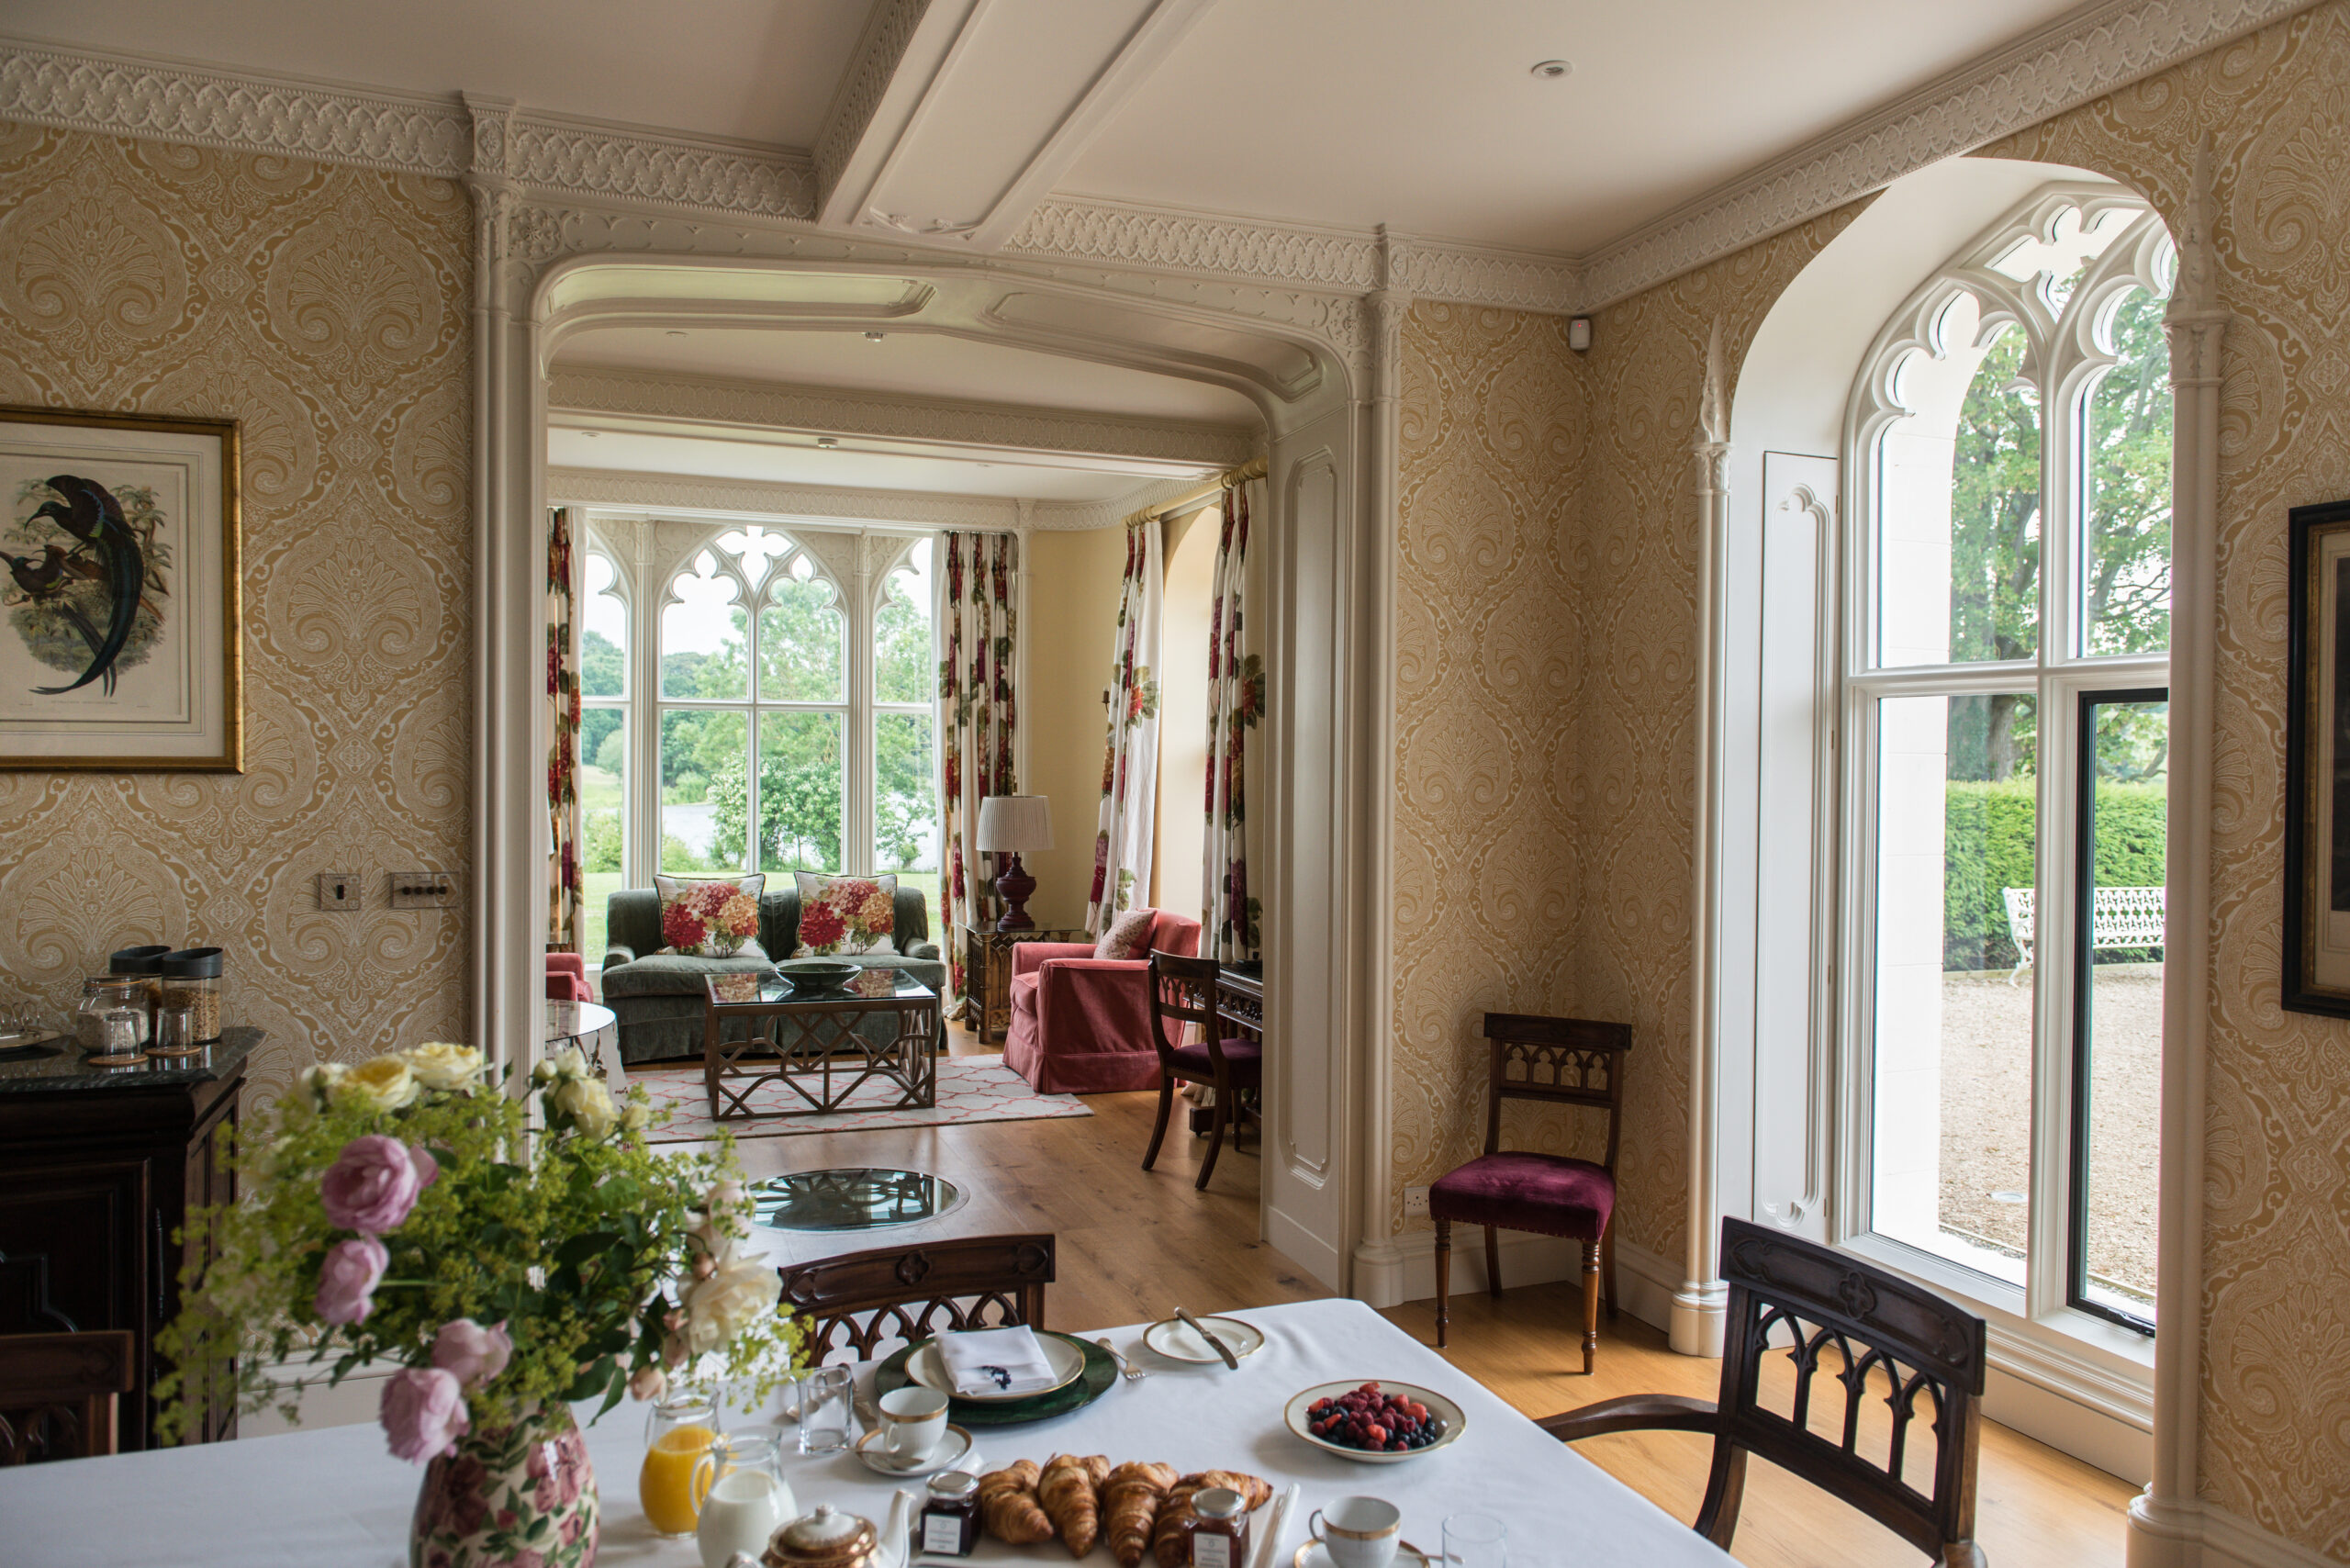 Breakfast Served in the dining room at the North Wing Bed and Breakfast at Combermere Abbey